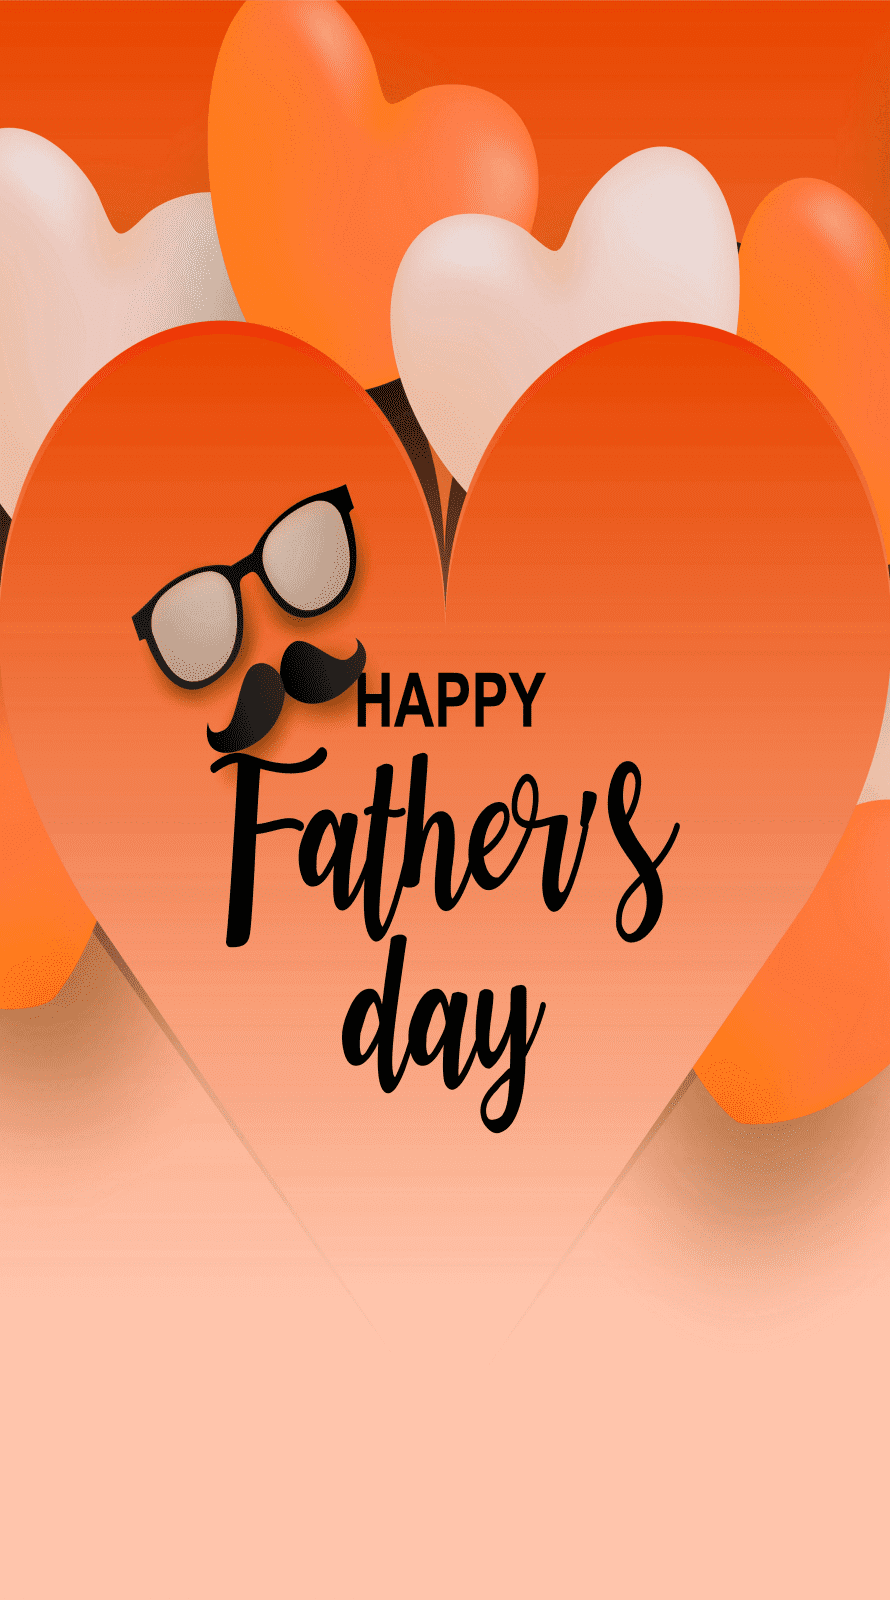 Cool Happy fathers day wishes background dia del padre 2022orange color hart